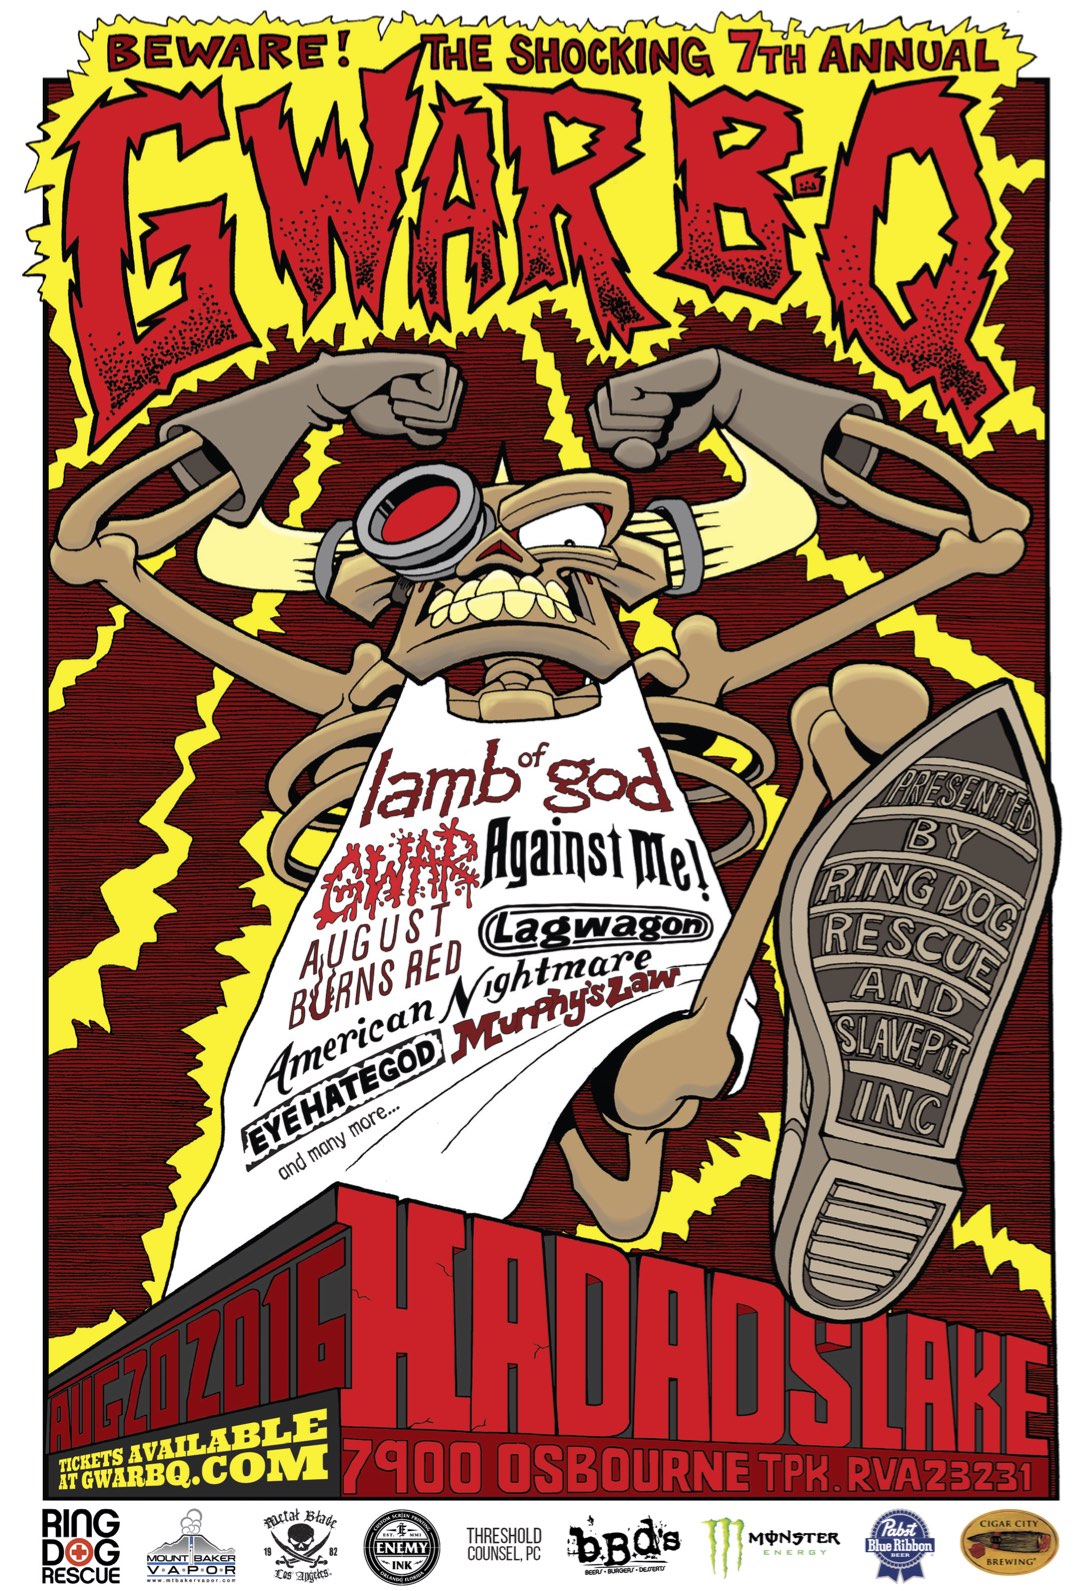 August Burns Red and More Playing The Sickest Party Of The Summer - The GWAR B-Q!